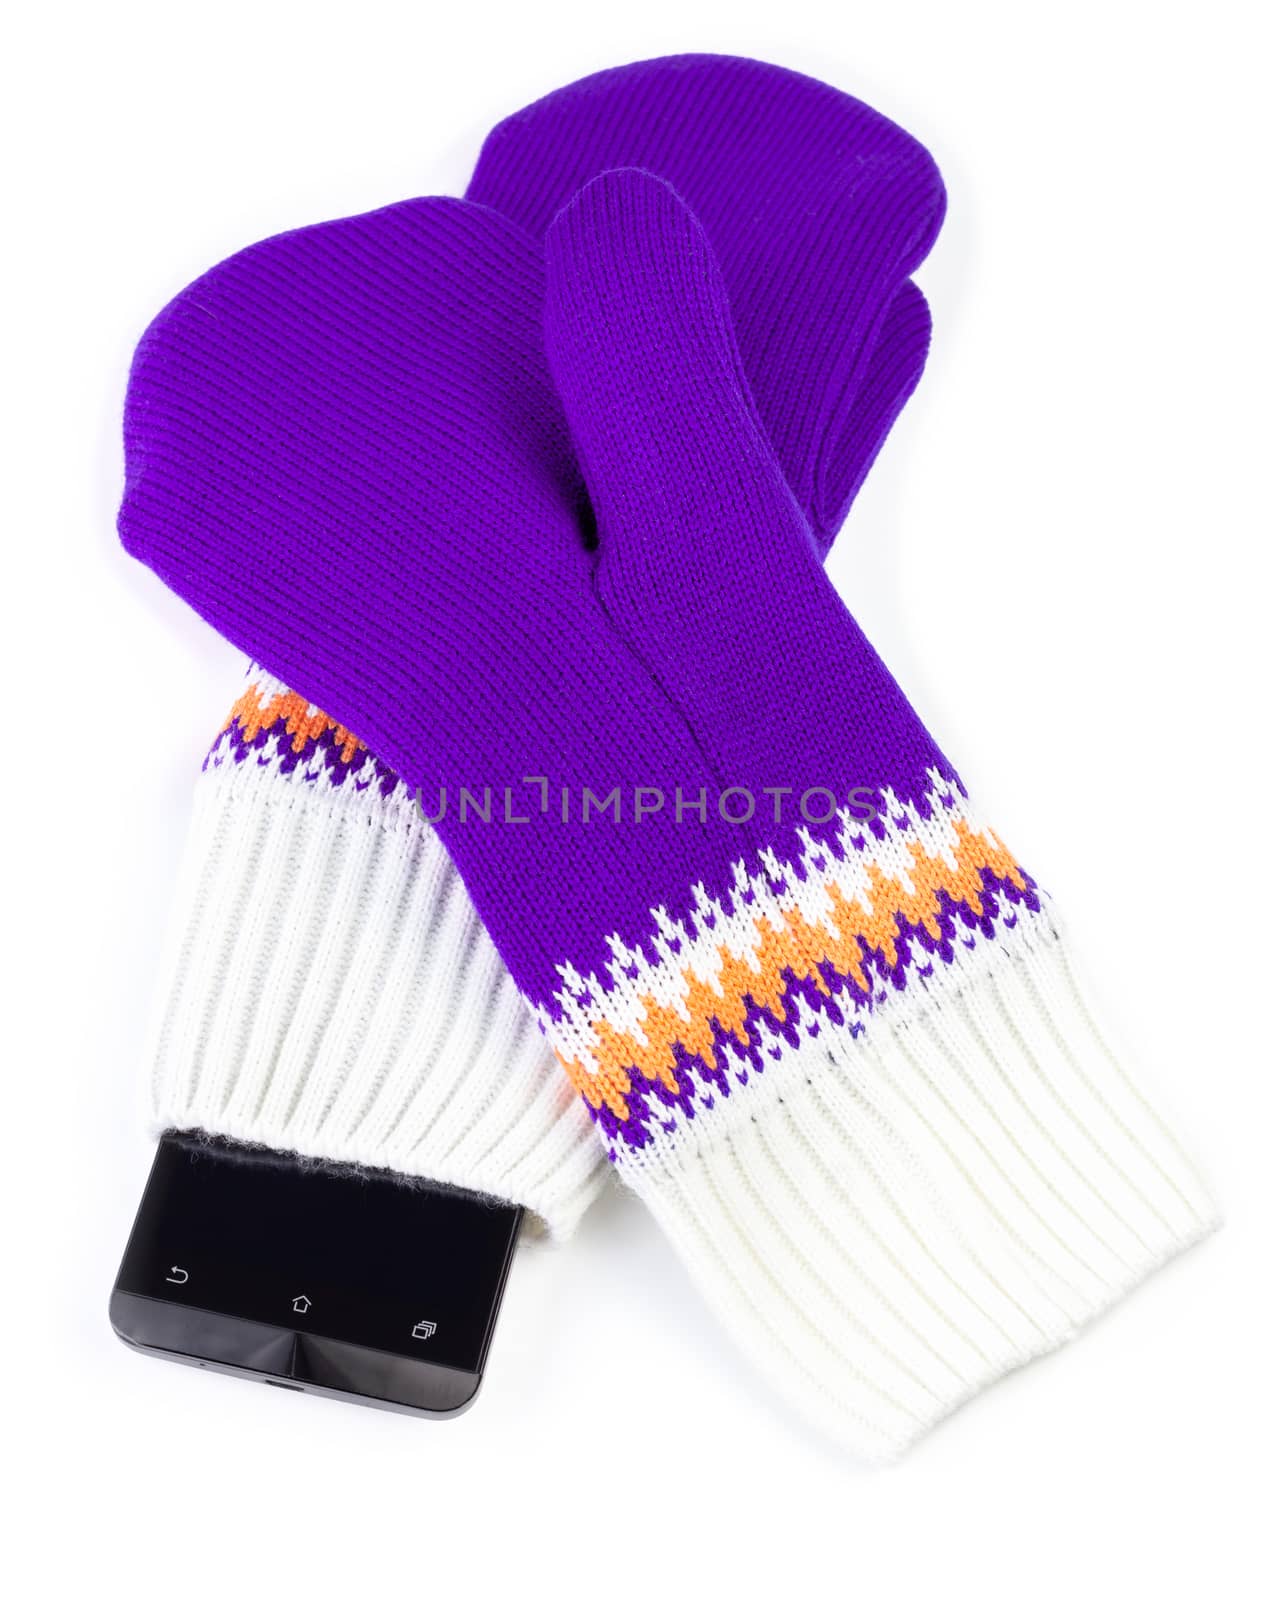 purple and white knited mittens with cellphone isolated on white background.